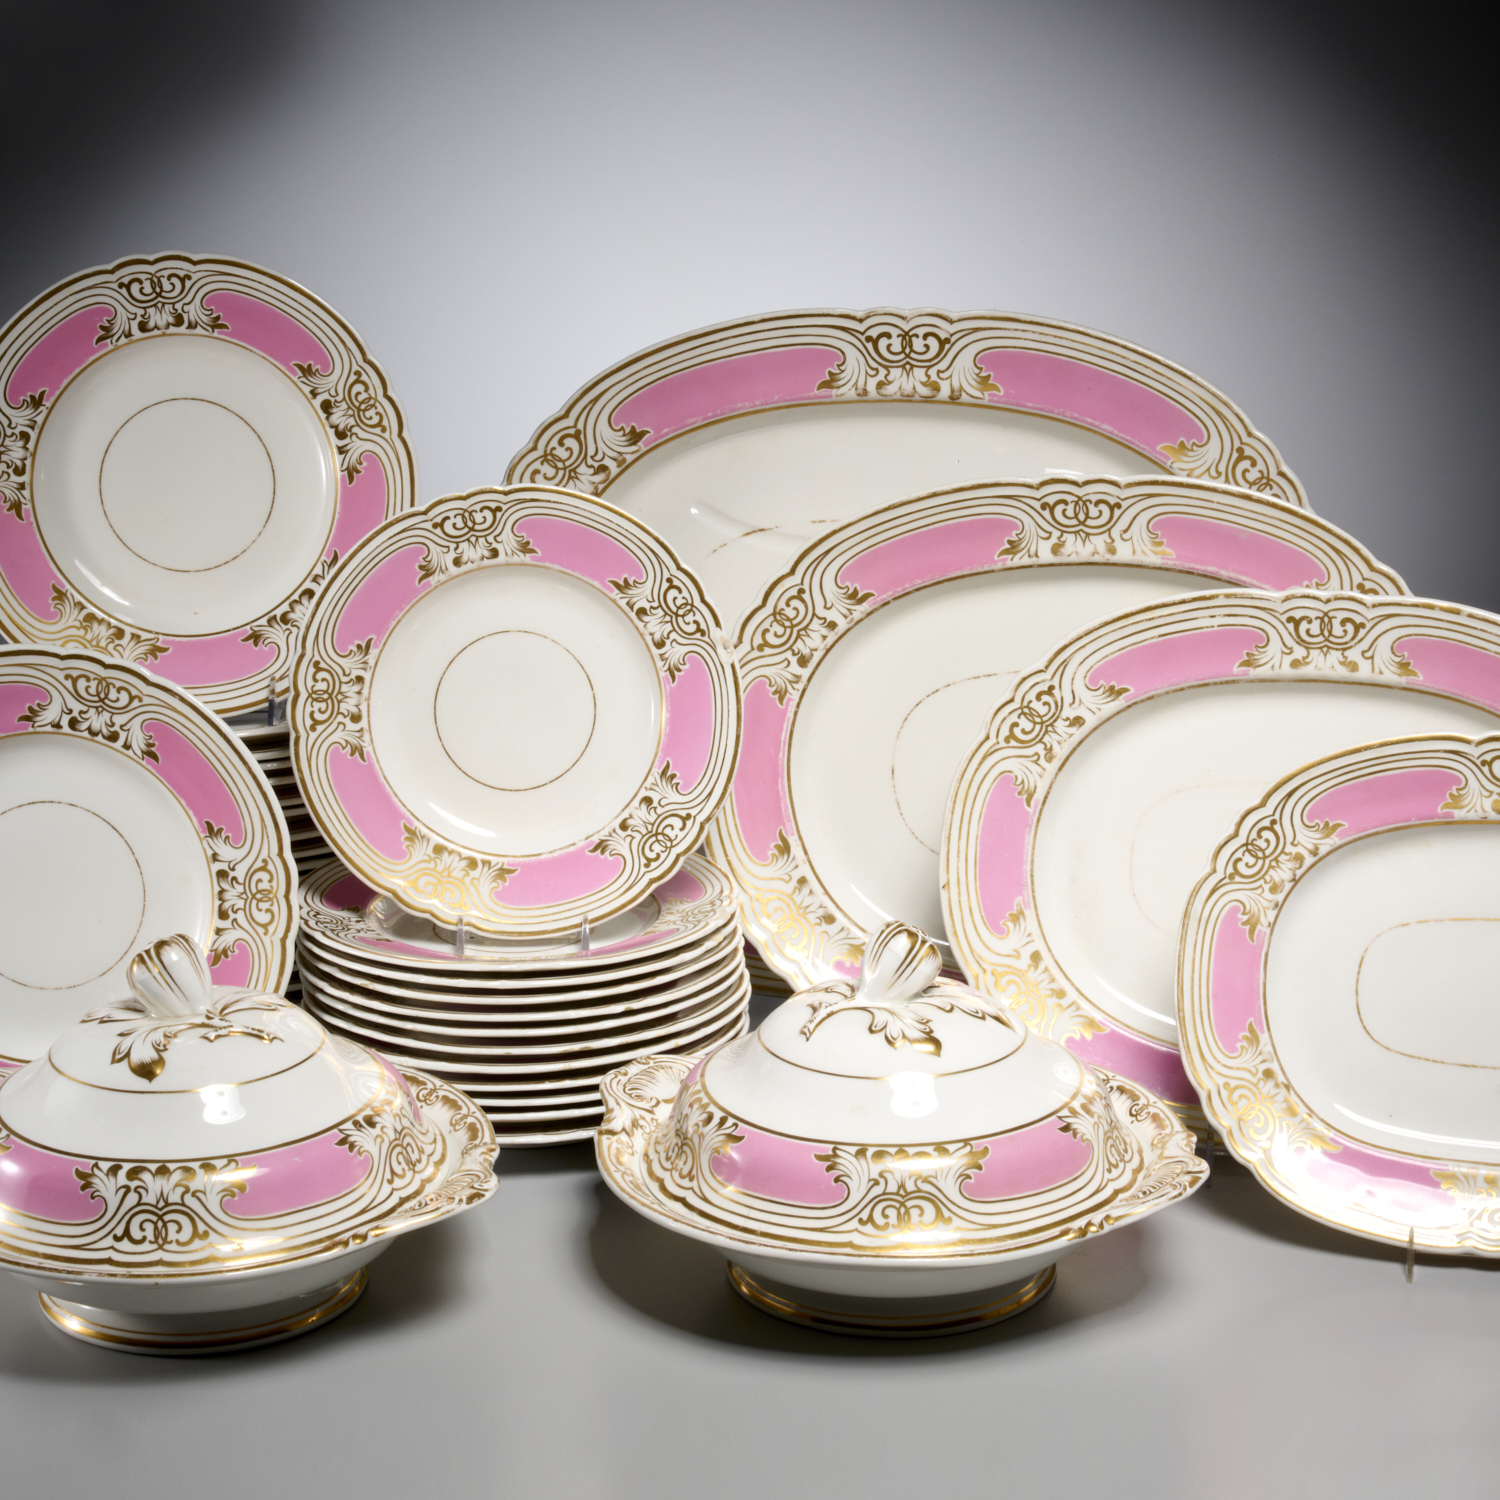 OLD PARIS SERVING AND DINNERWARE 3603aa